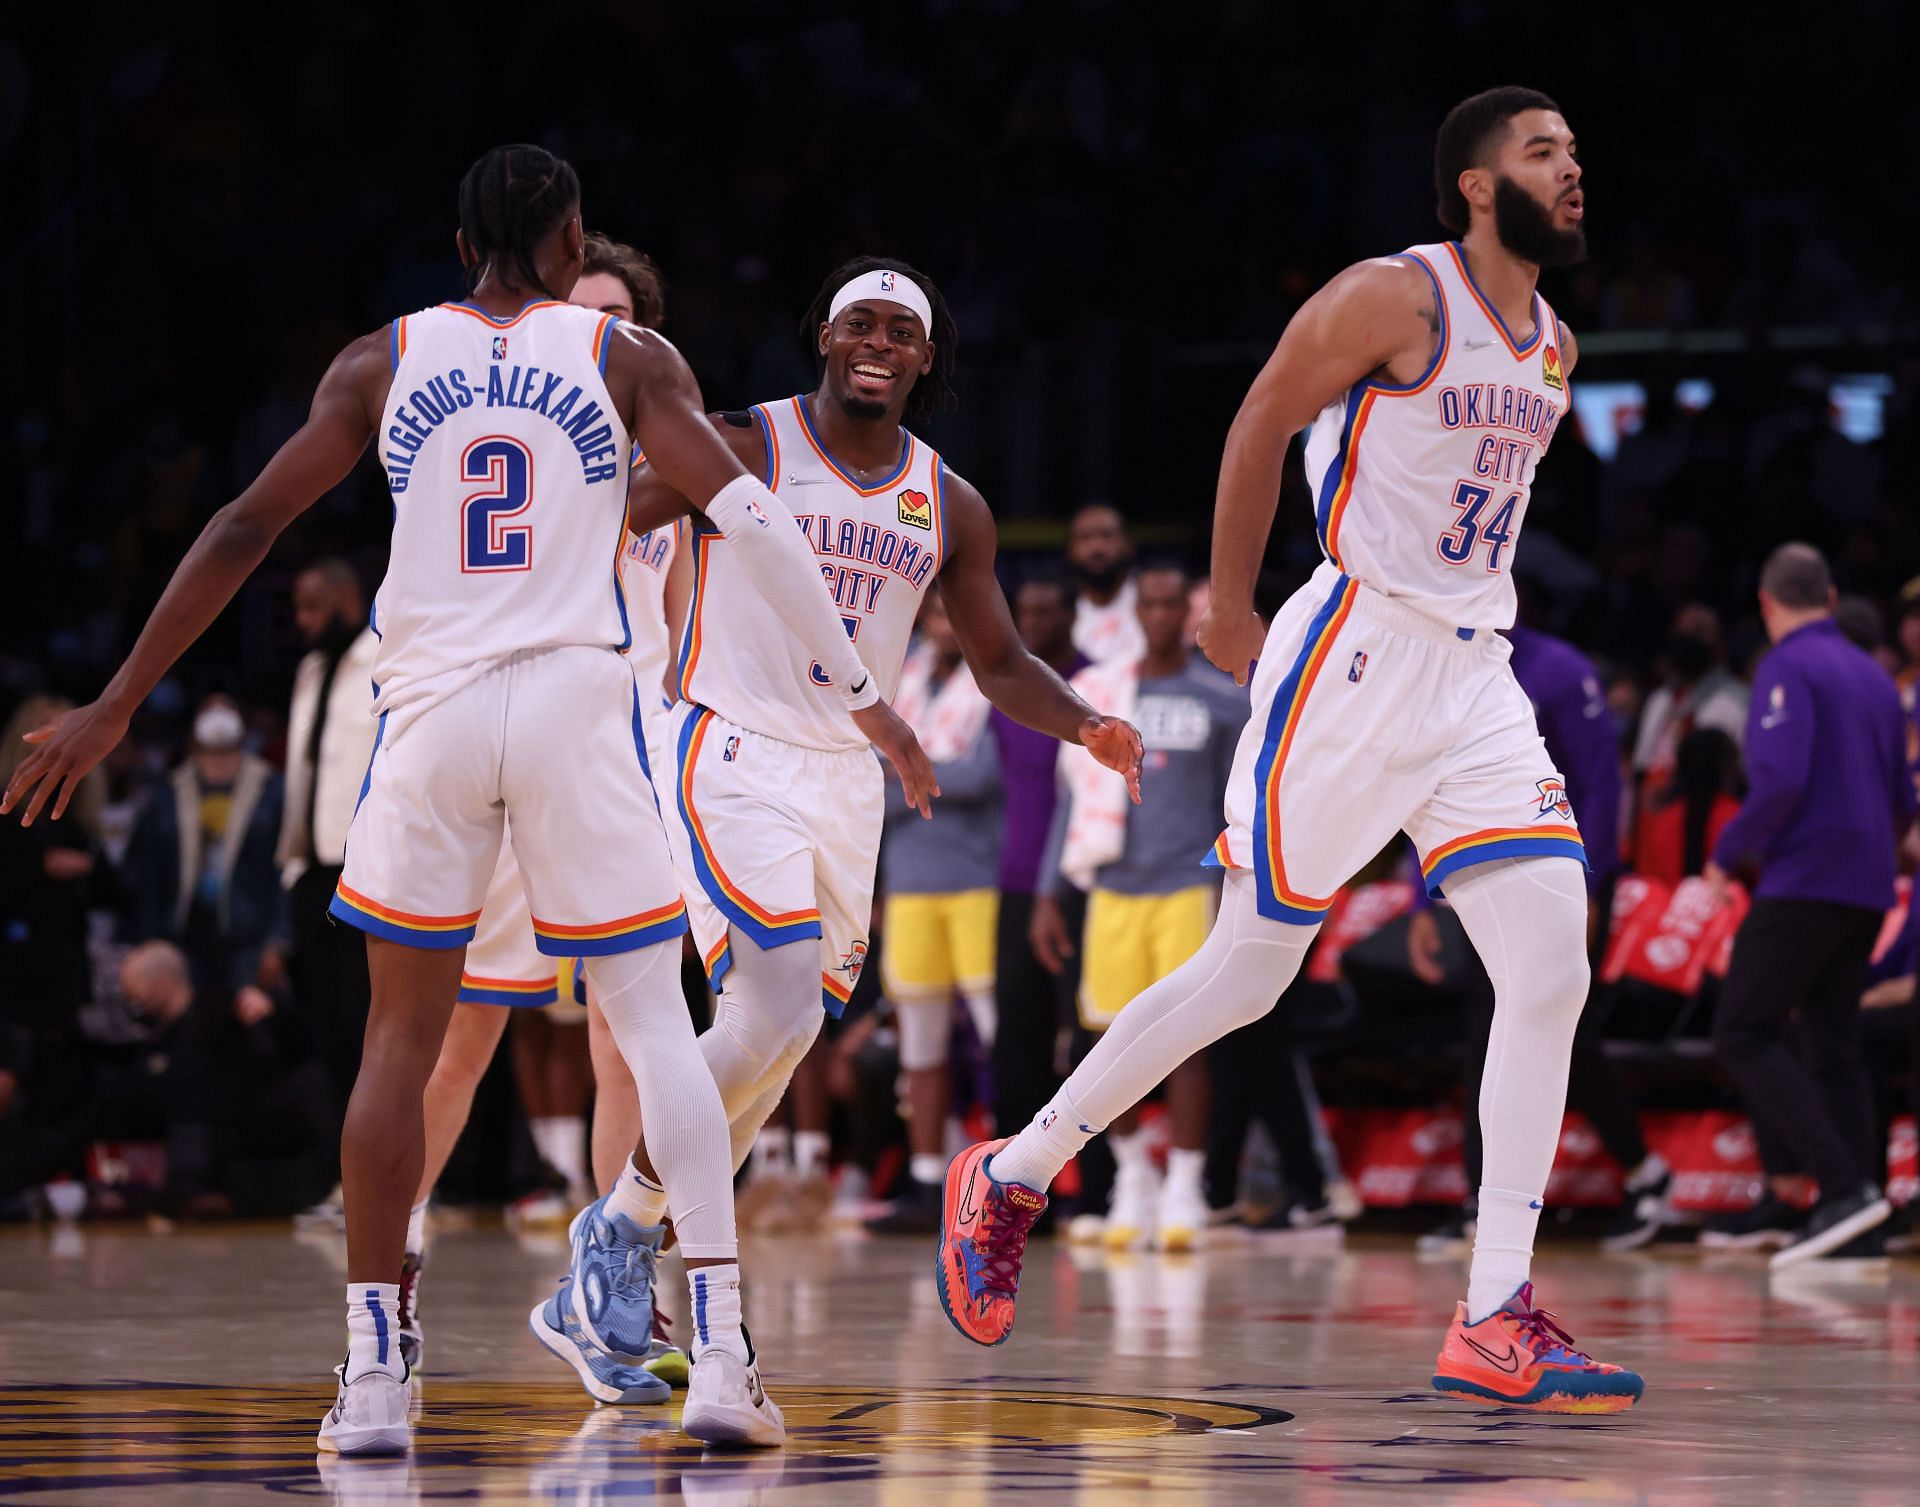 Oklahoma City Thunder celebrate after a shot against the LA Lakers.